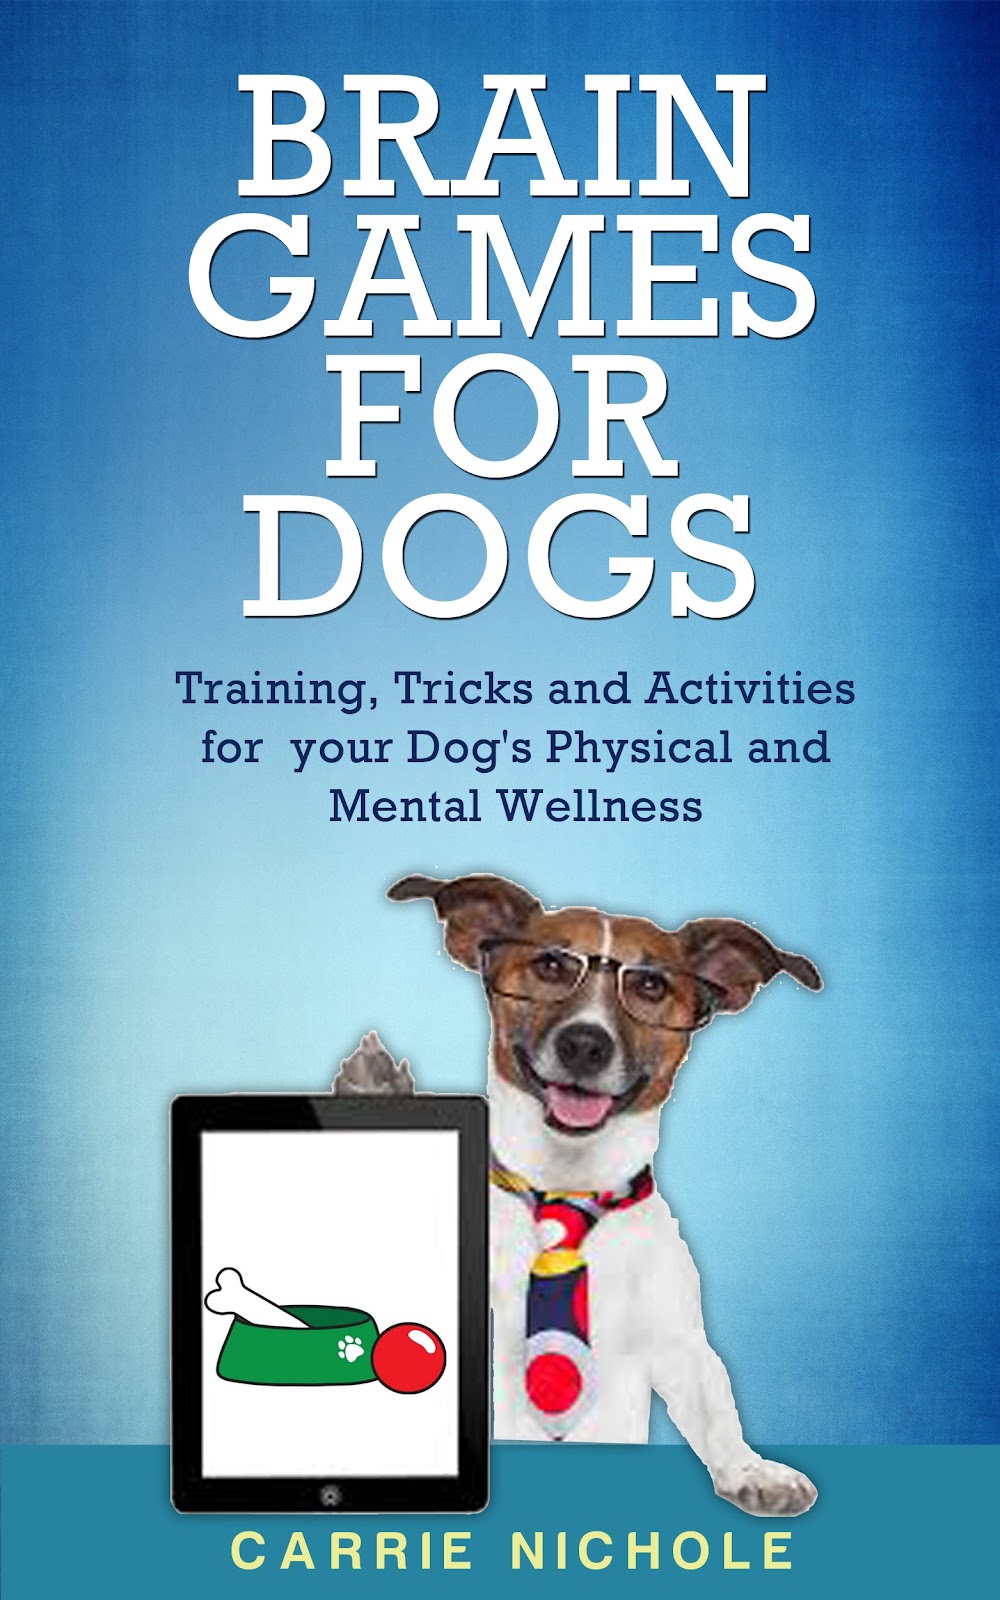 Premium Ebook - Brain Games for Dogs: Training, Tricks and Activities for your Dog’s Physical and Mental wellness( Dog training, Puppy training,Pet training books, Puppy ... games for dogs, How to train a dog Book 1)